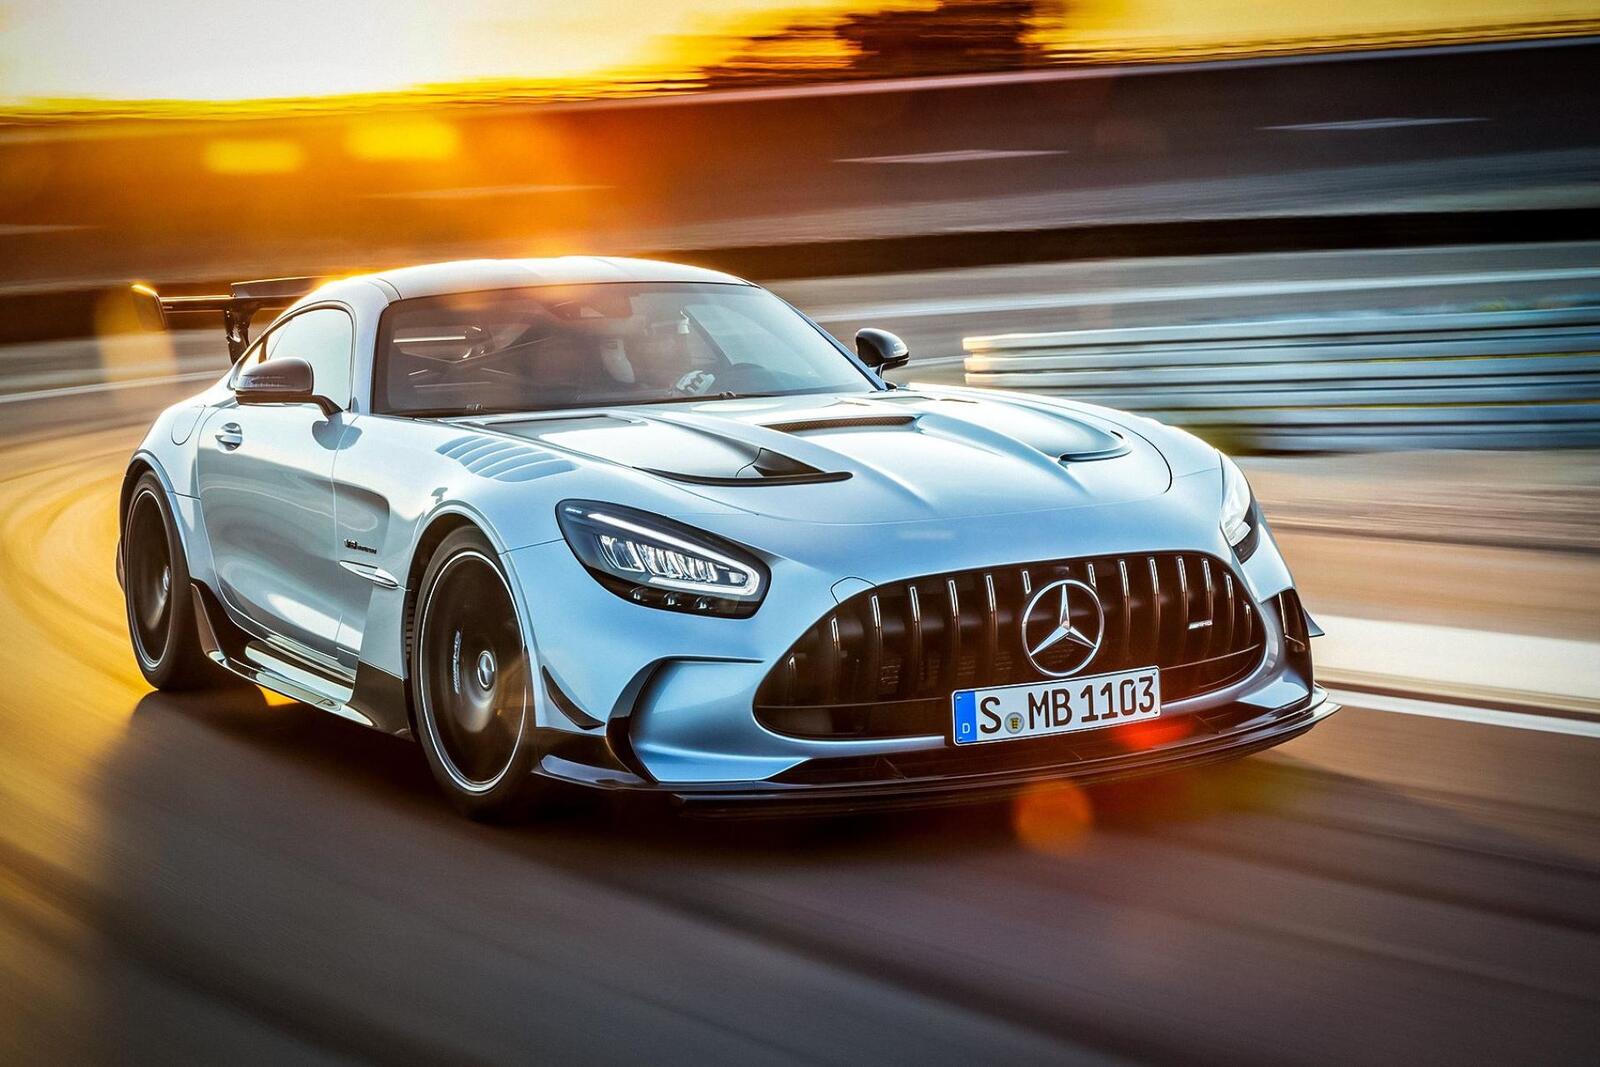 Free photo The Mercedes-AMG GT is flying down the road.